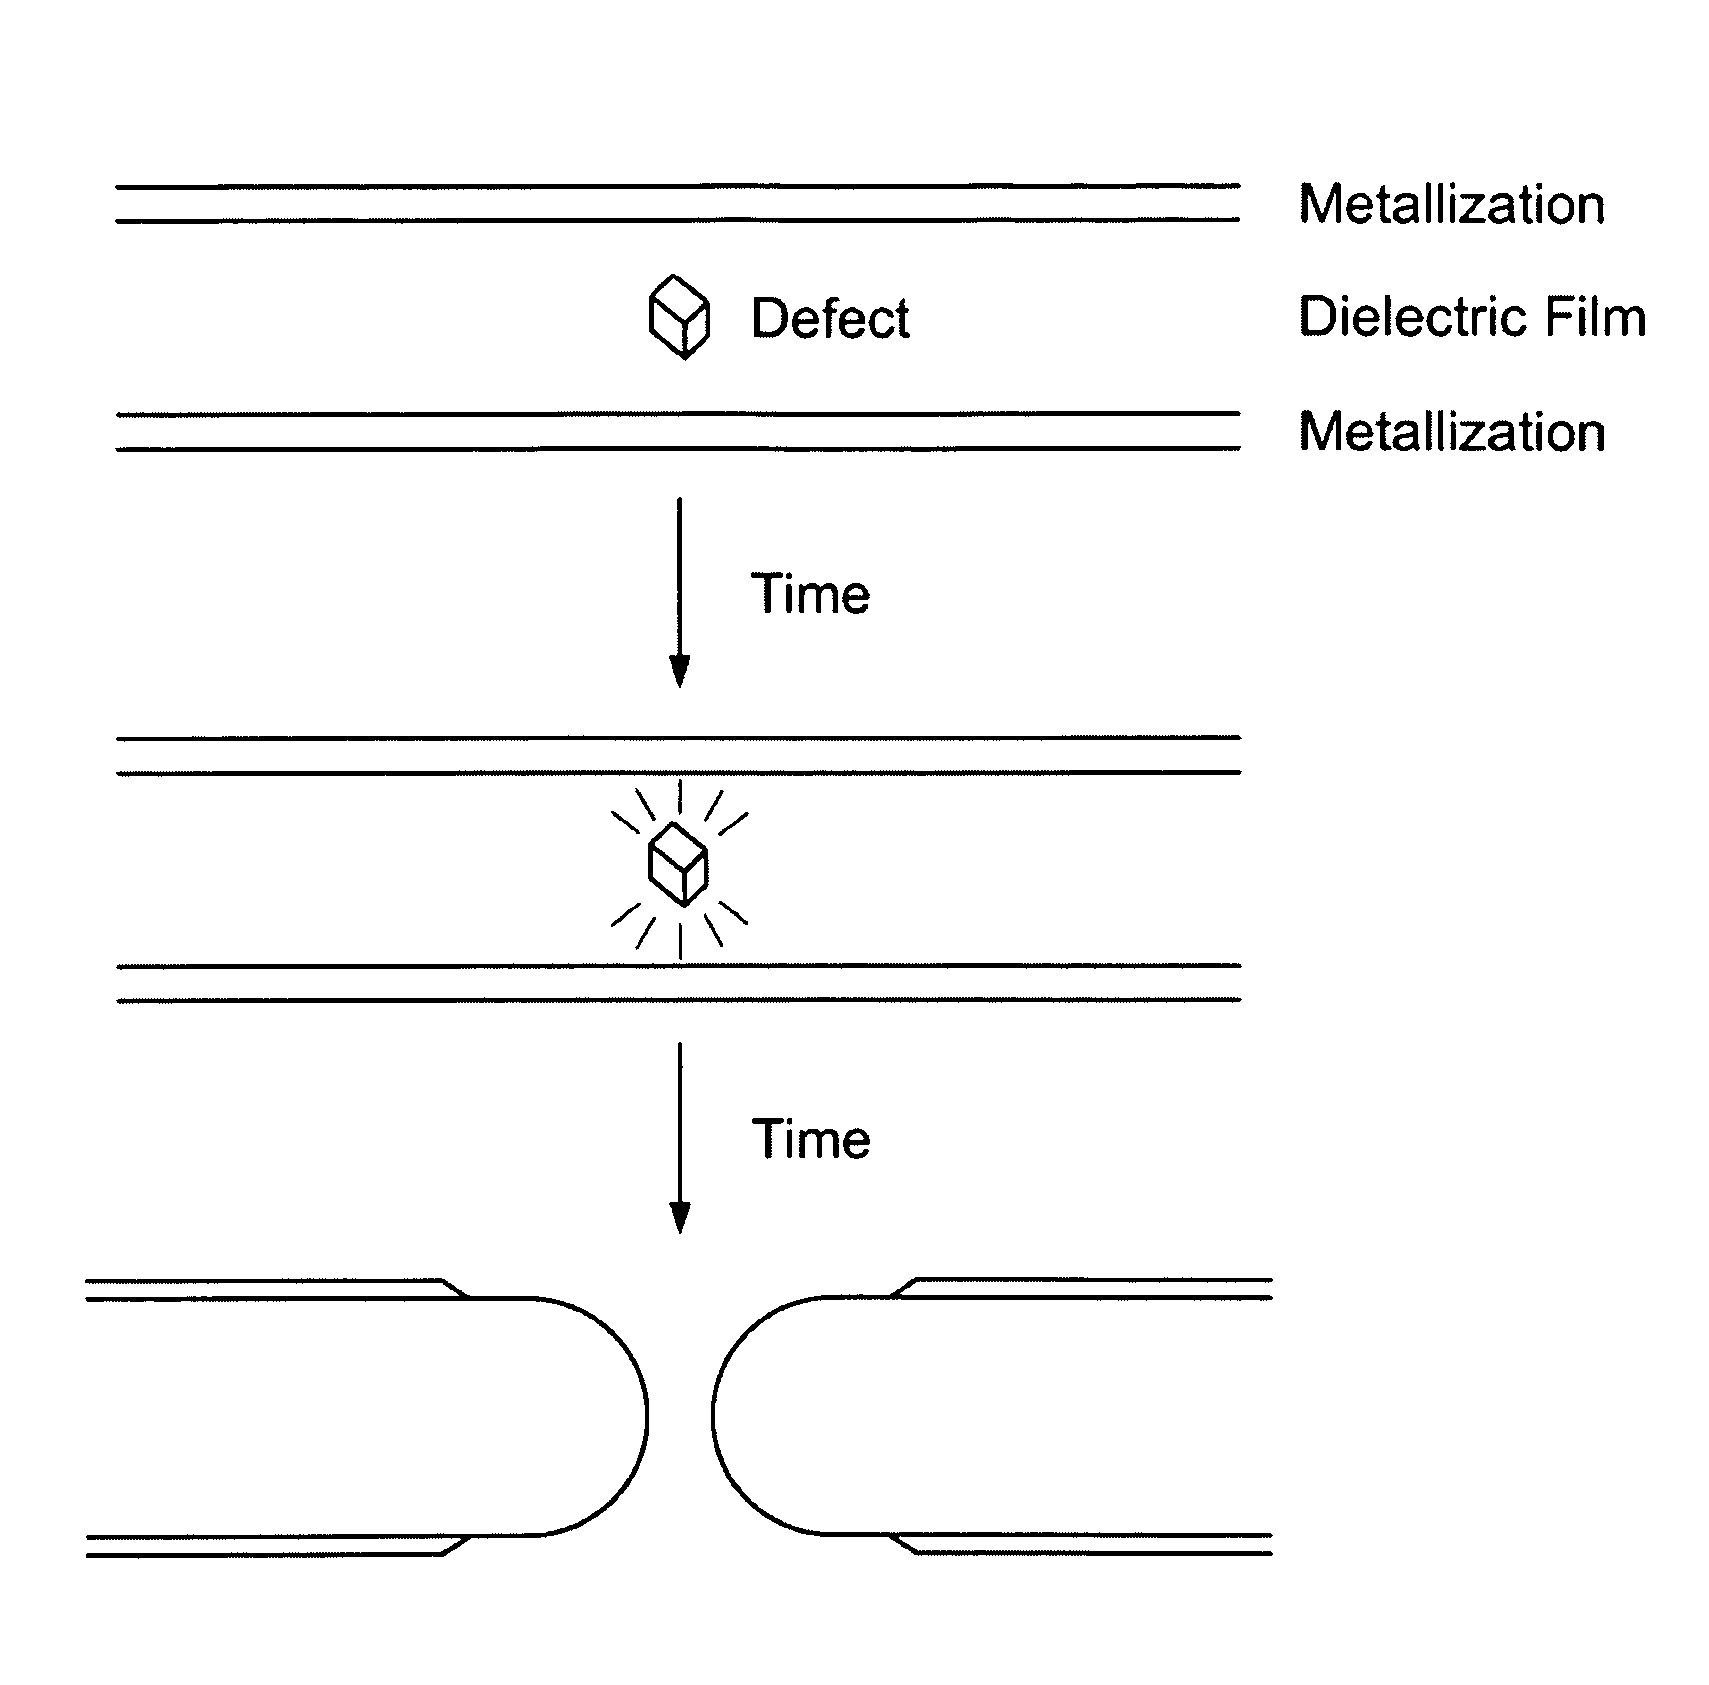 Fault-tolerant materials and methods of fabricating the same